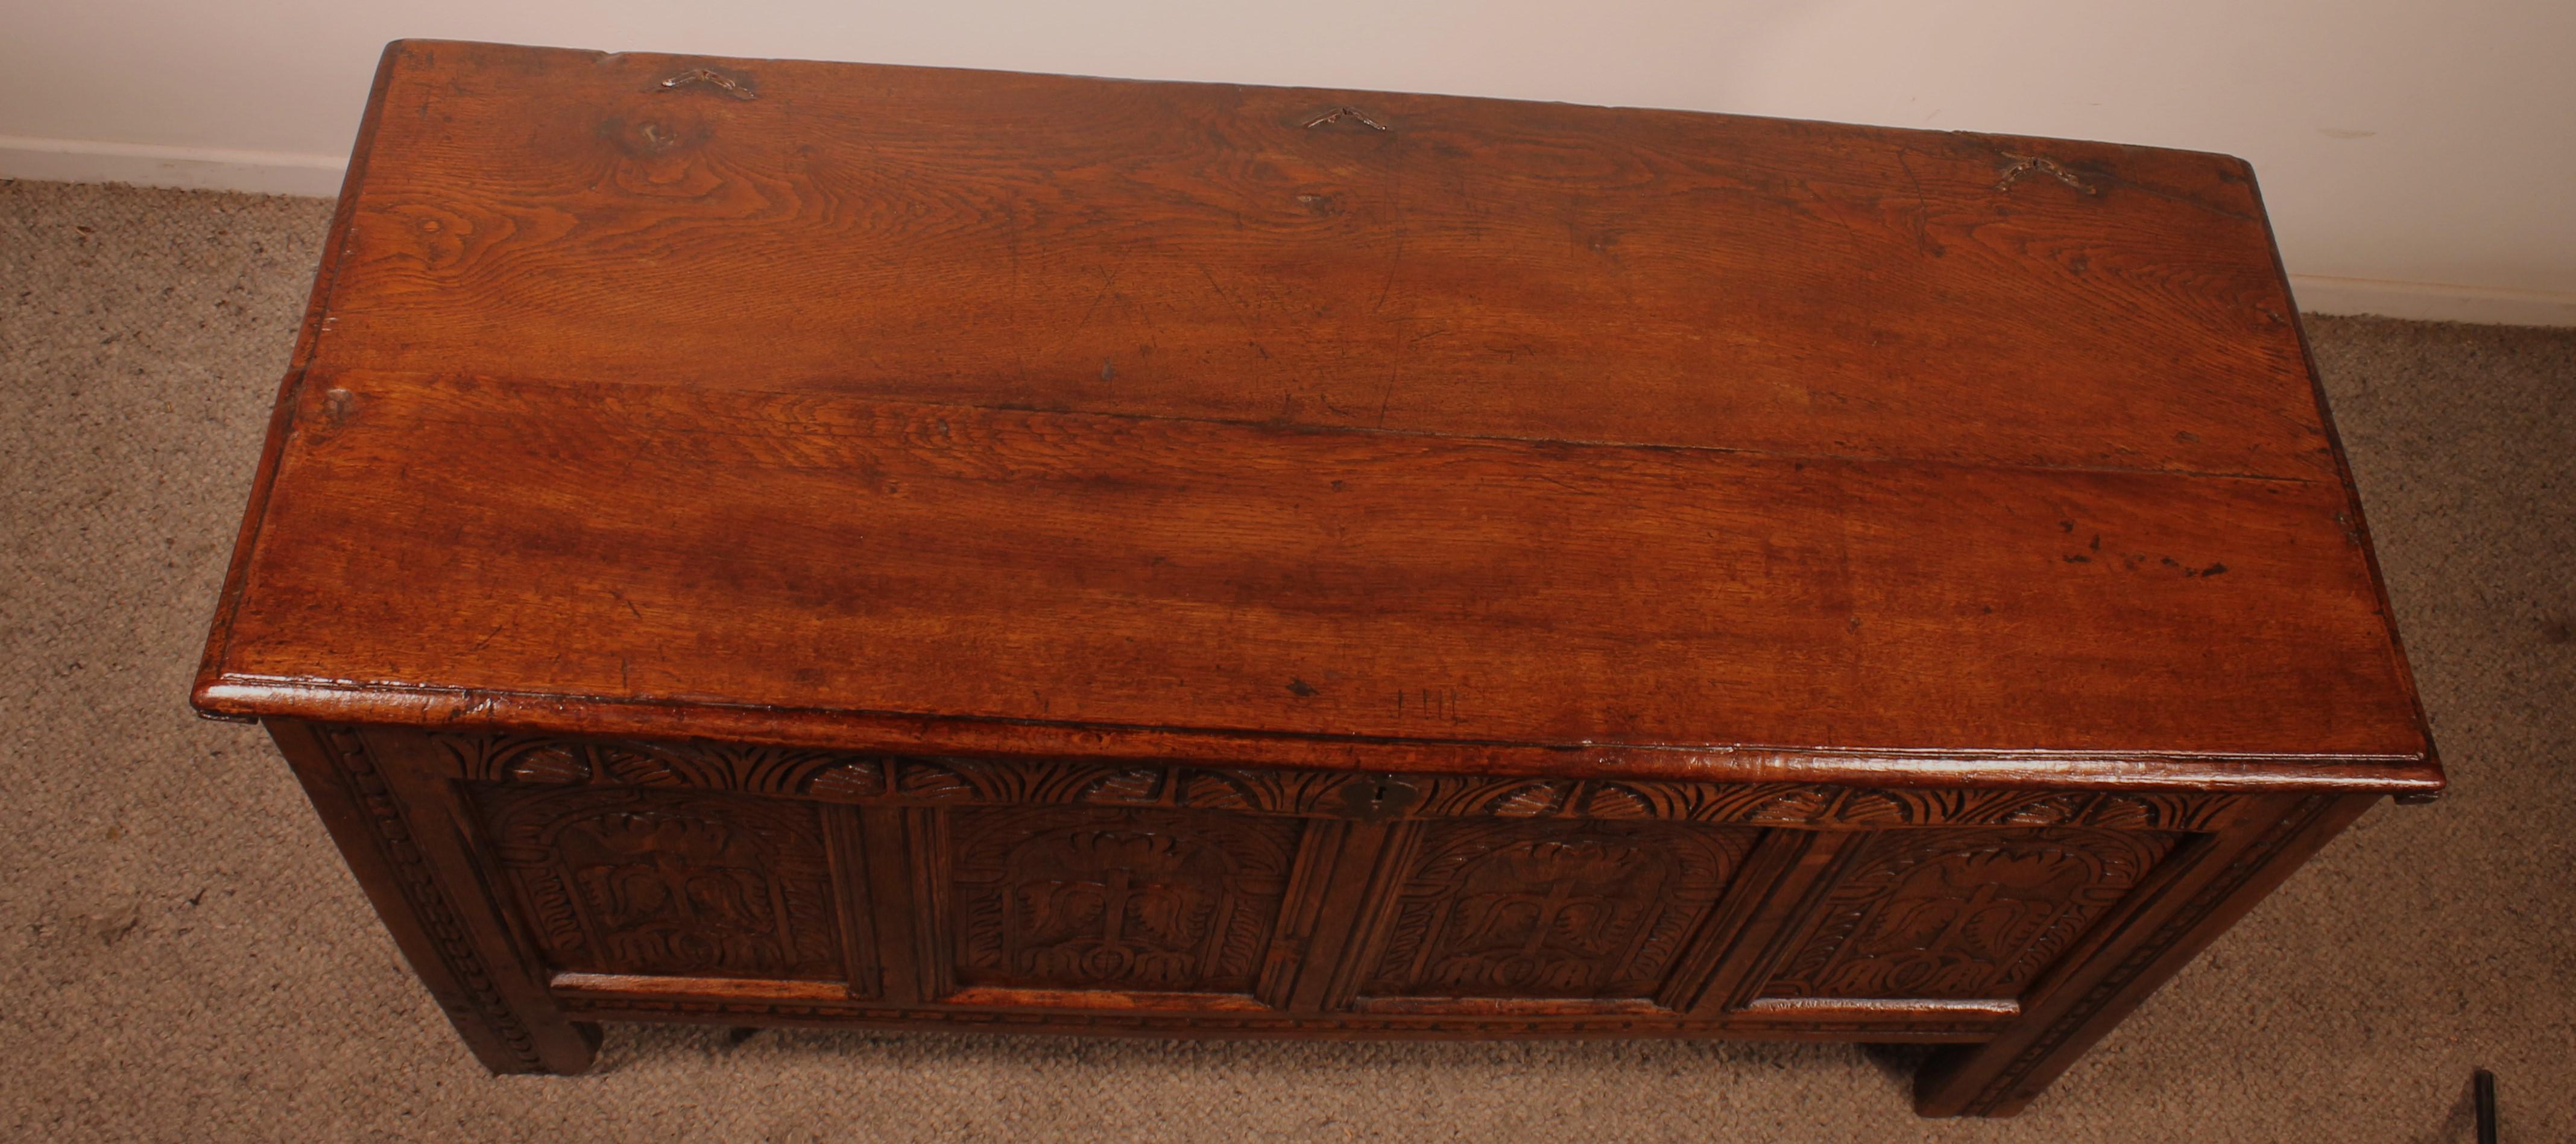 Oak Chest From 17th Century 4 Panels For Sale 2